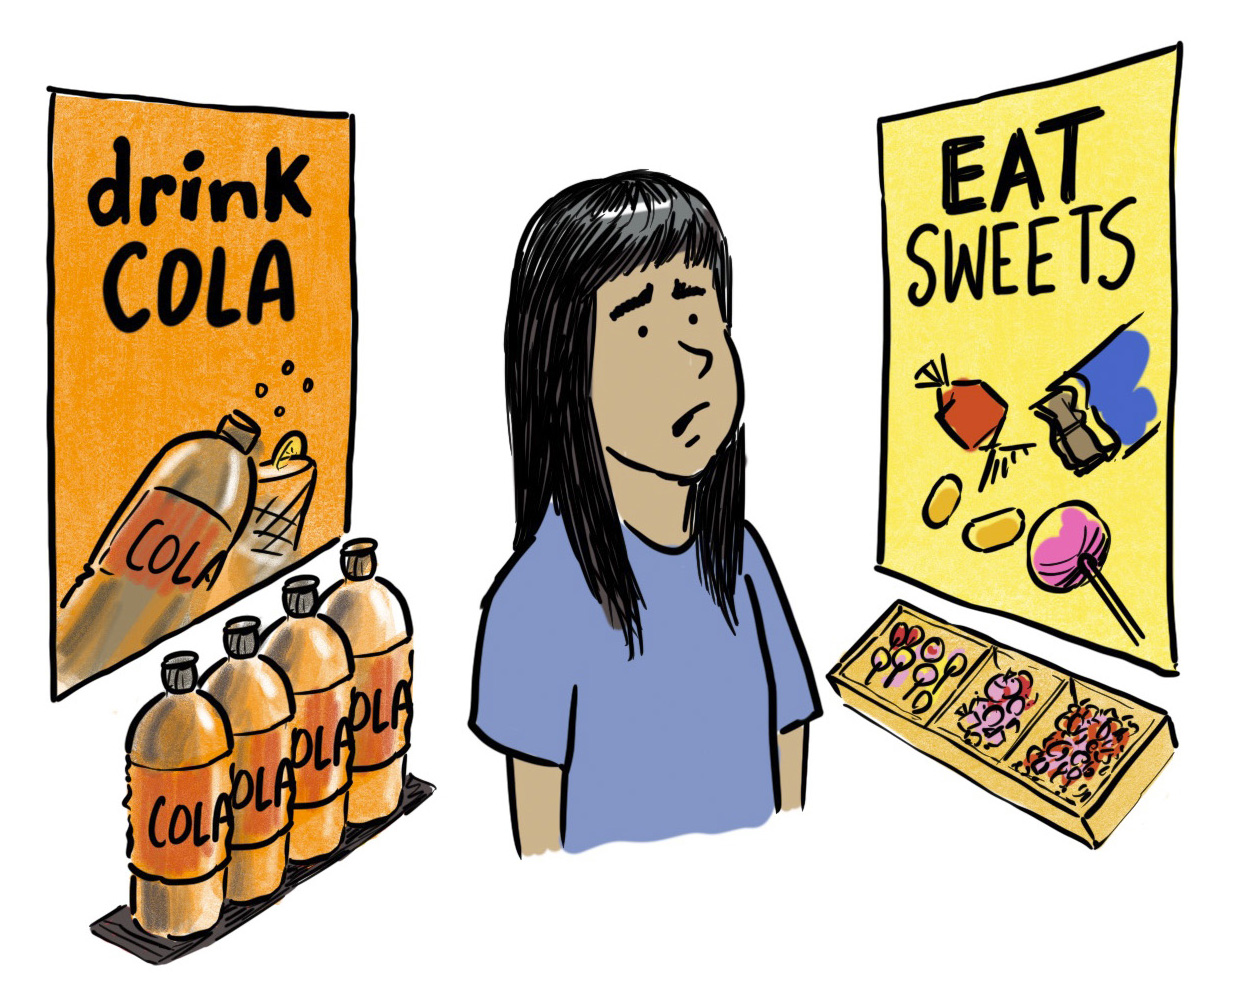 Queenie (from My Hero) is distressed at the nutritional make up of soda and sweets.